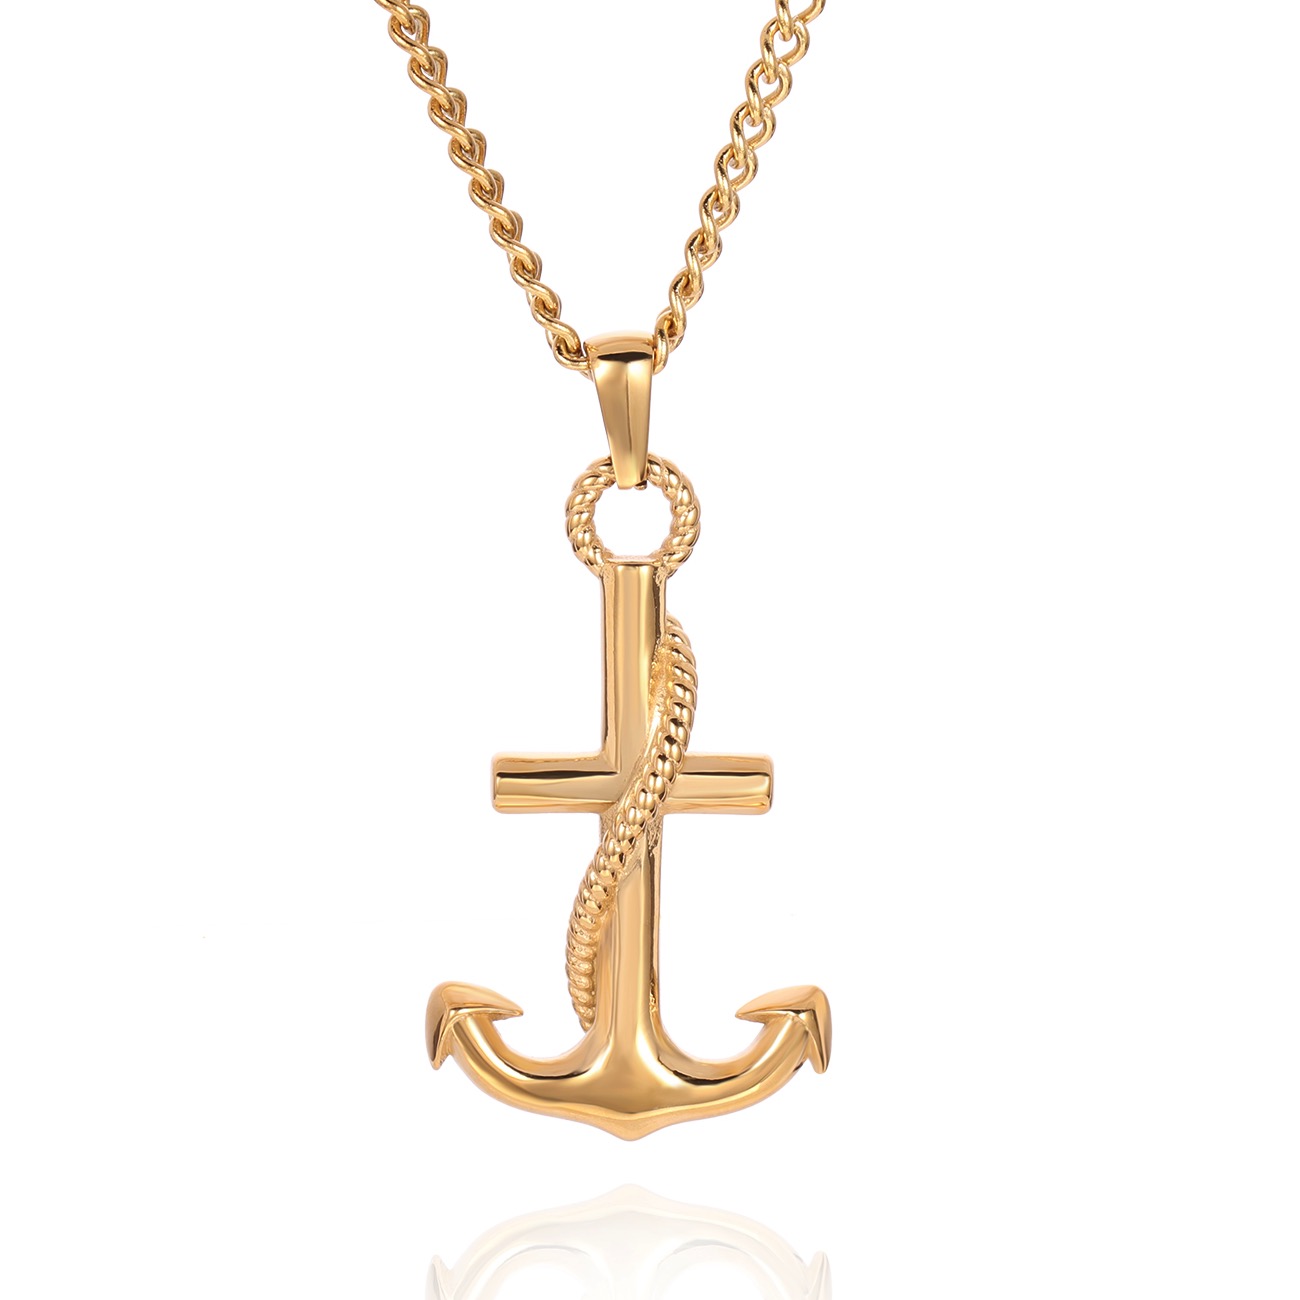 14K YELLOW GOLD ANCHOR NECKLACE | Patty Q's Jewelry Inc